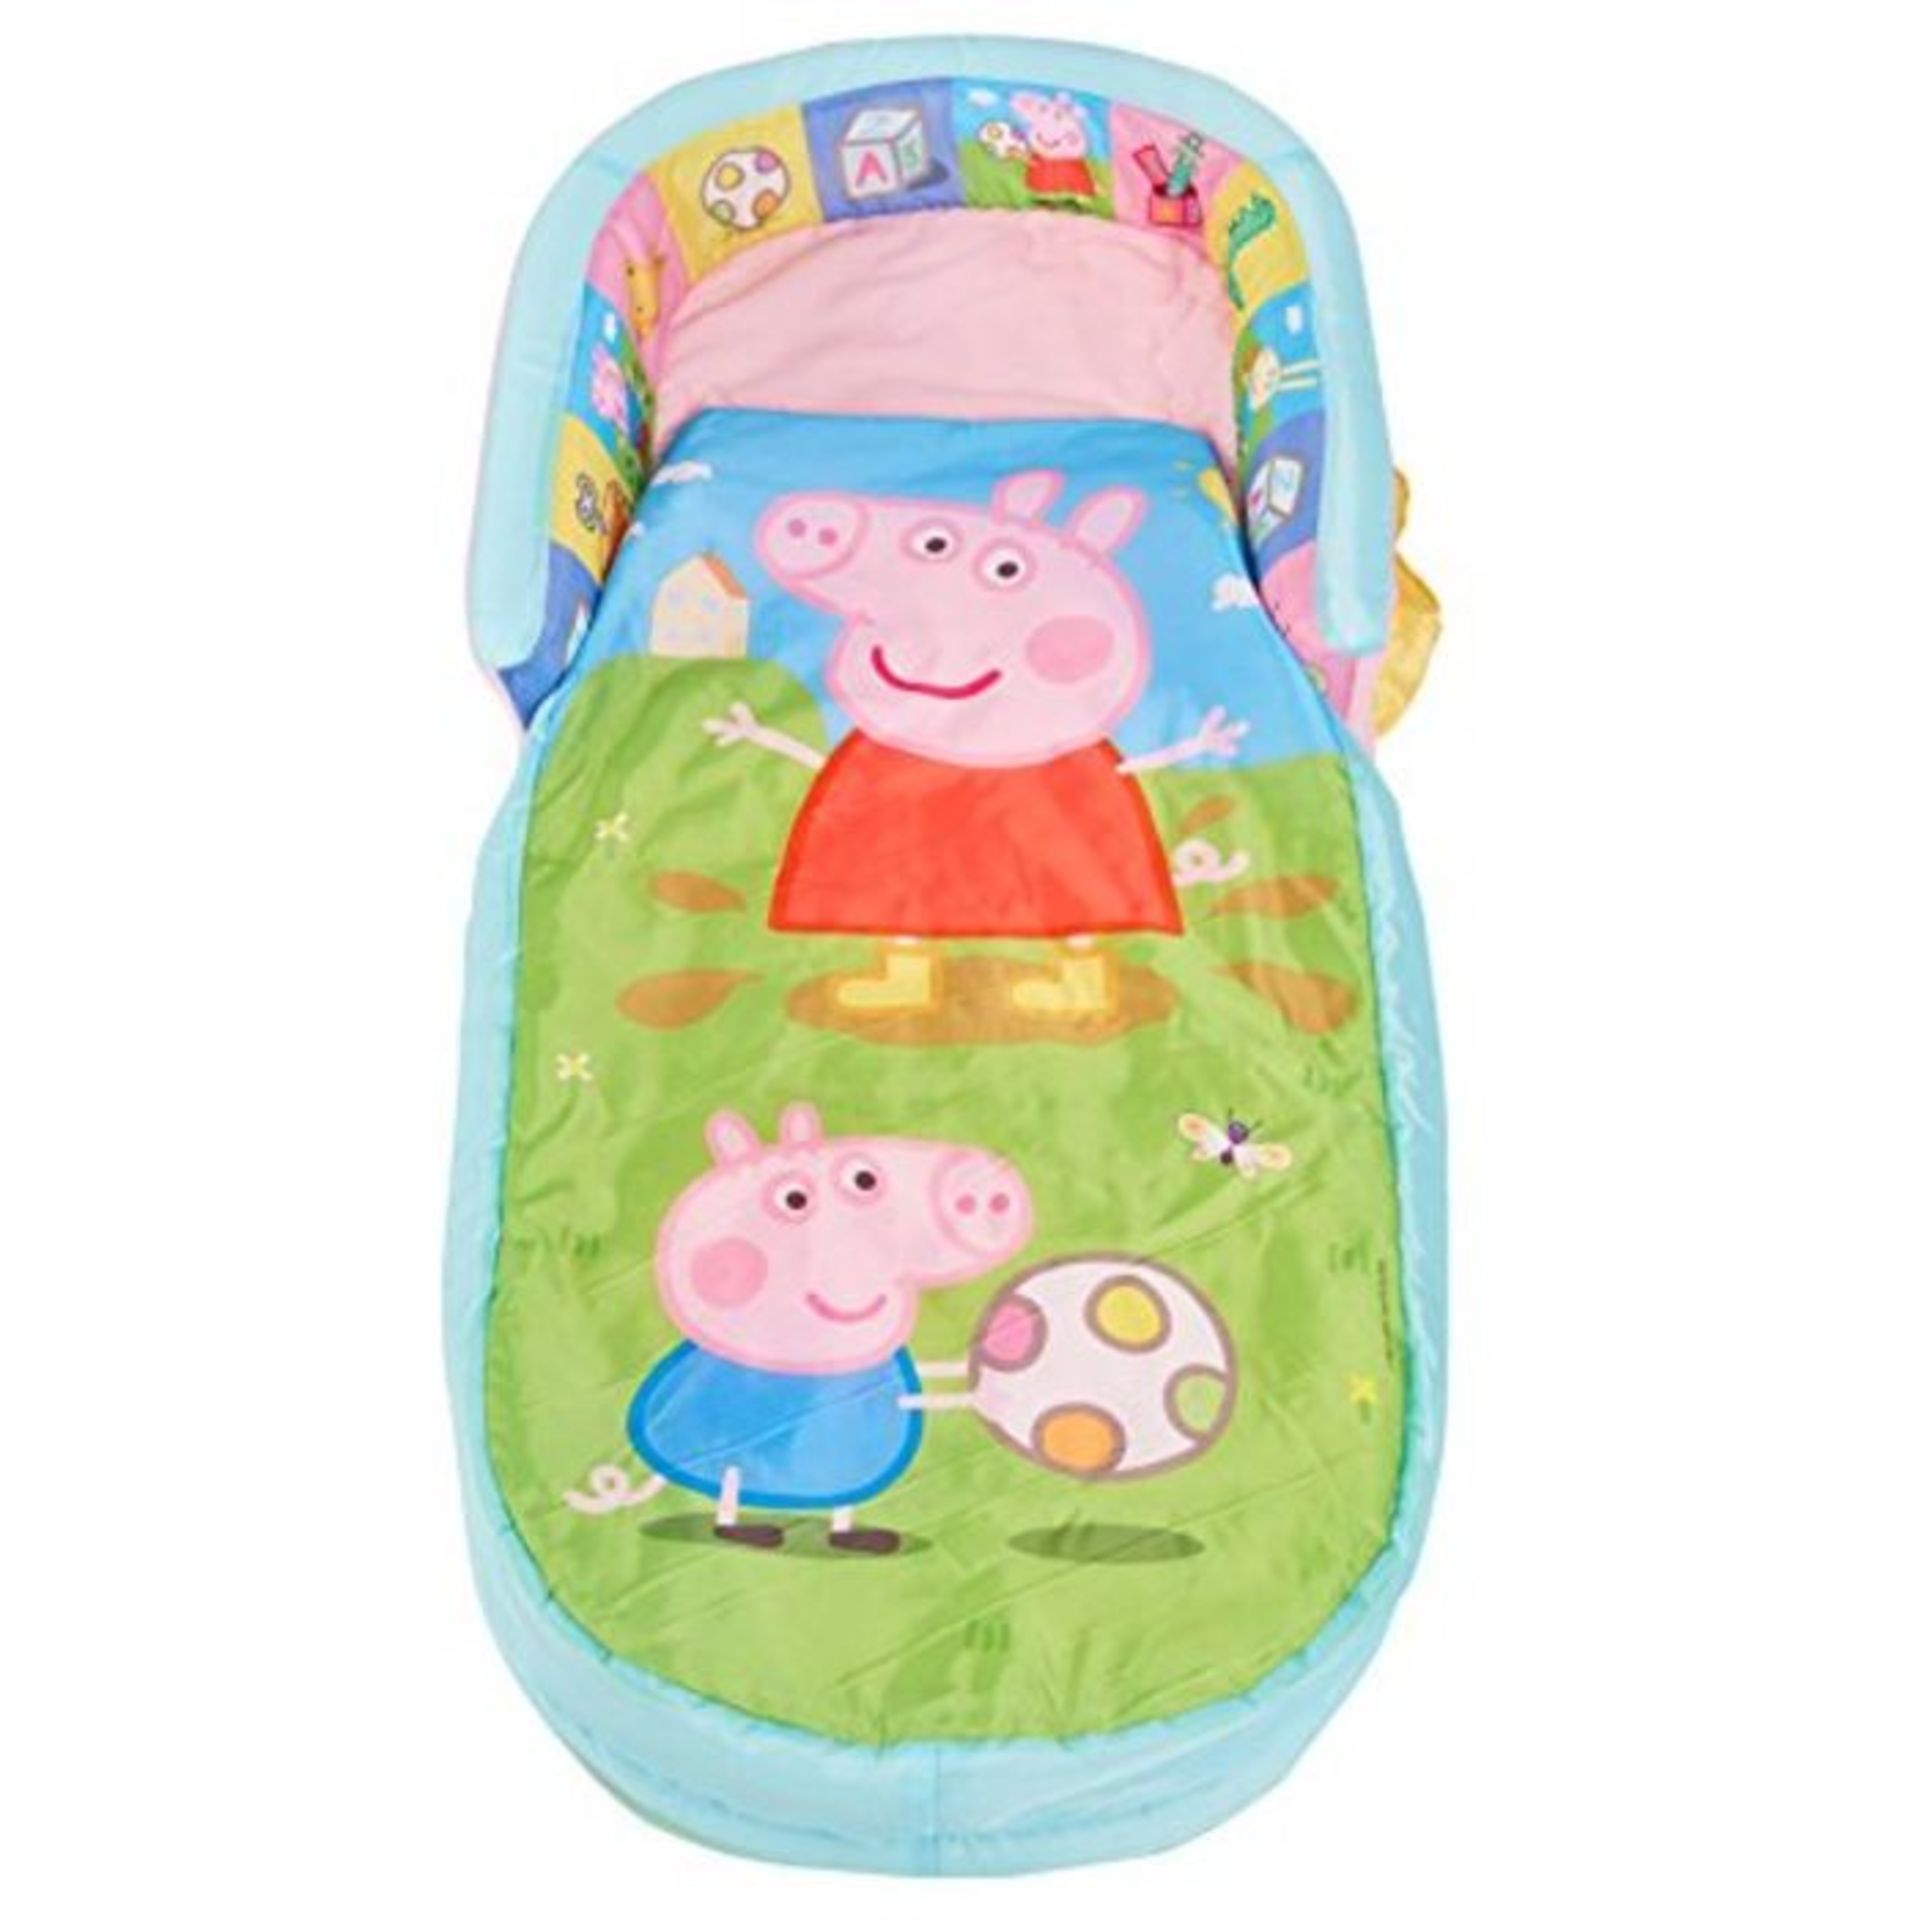 Readybed Peppa Pig My First Bed, Polyester-Cotton, Multi, 130 x 61 x 23 cm